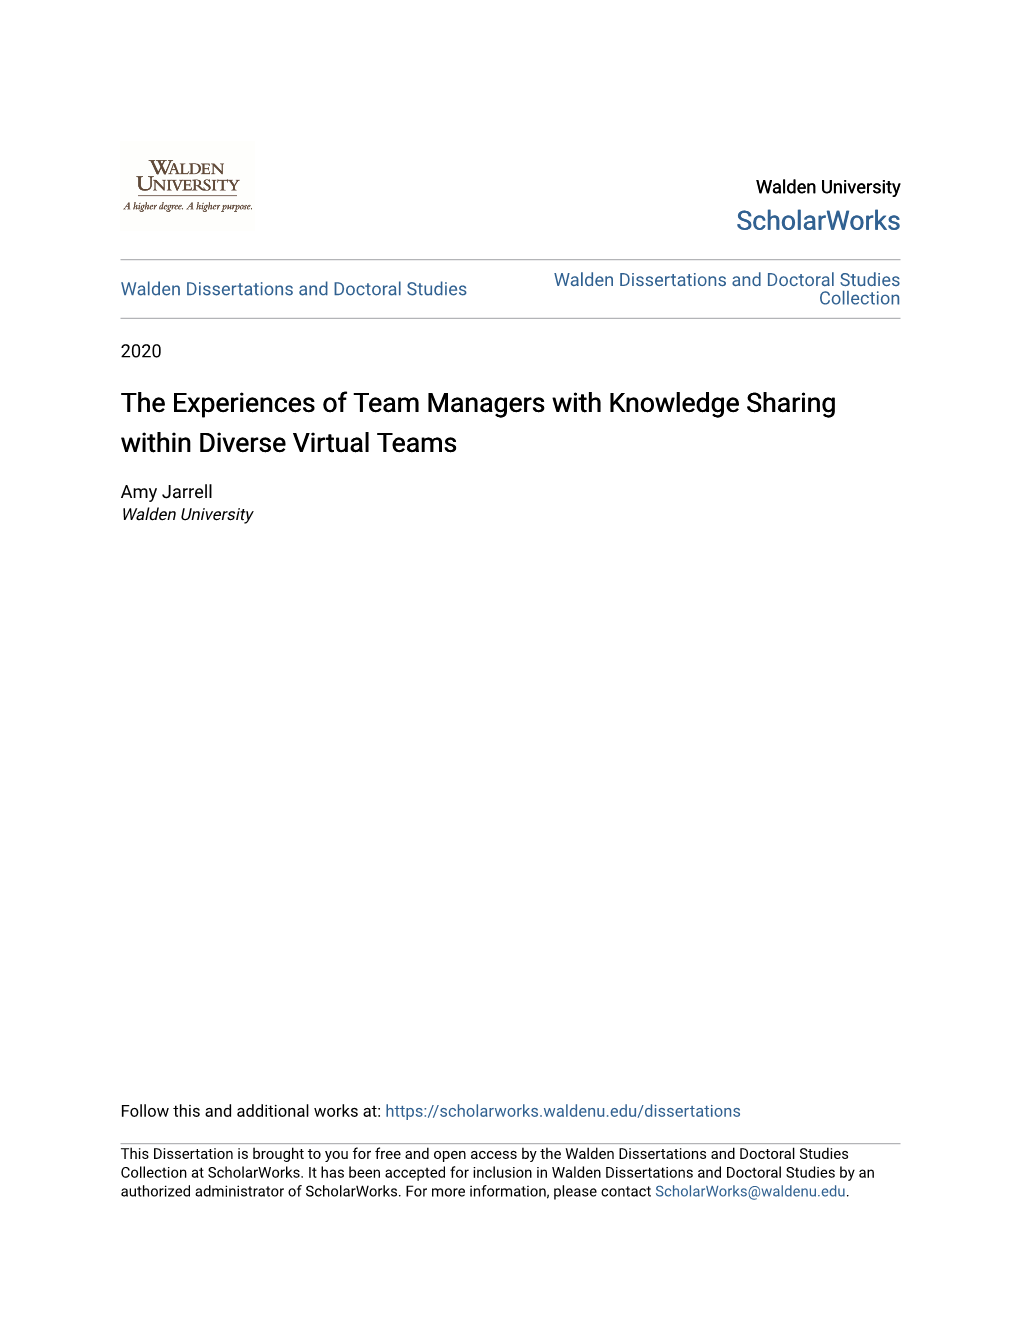 The Experiences of Team Managers with Knowledge Sharing Within Diverse Virtual Teams